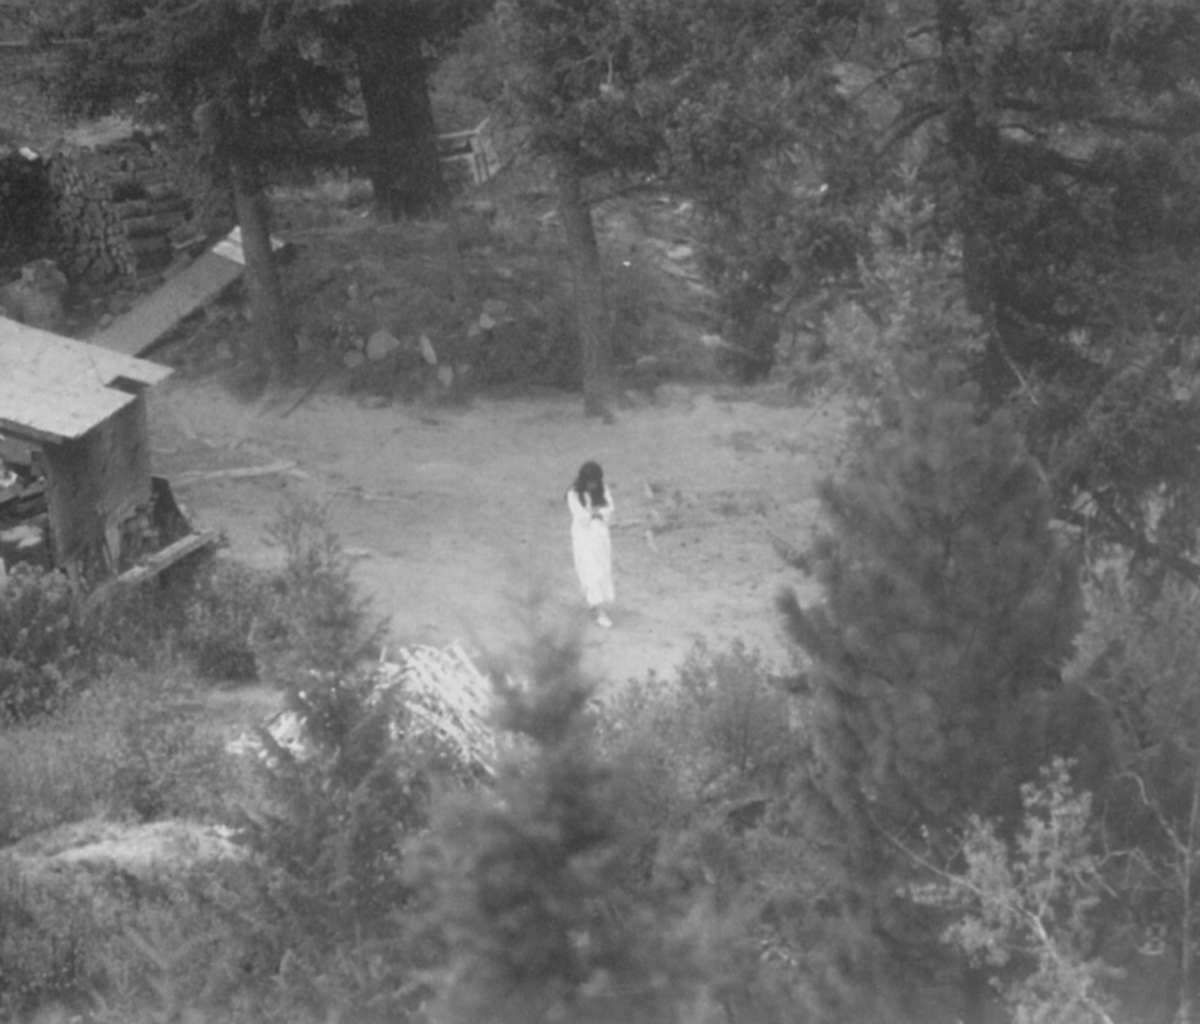 PHOTO: This is the last photograph of Vicki Weaver before she was killed by an FBI sniper Aug. 22, 1992 in the Ruby Ridge standoff. It was taken by USMS surveillance the morning of Aug. 21, 1992 and was evidence at the subsequent trial.